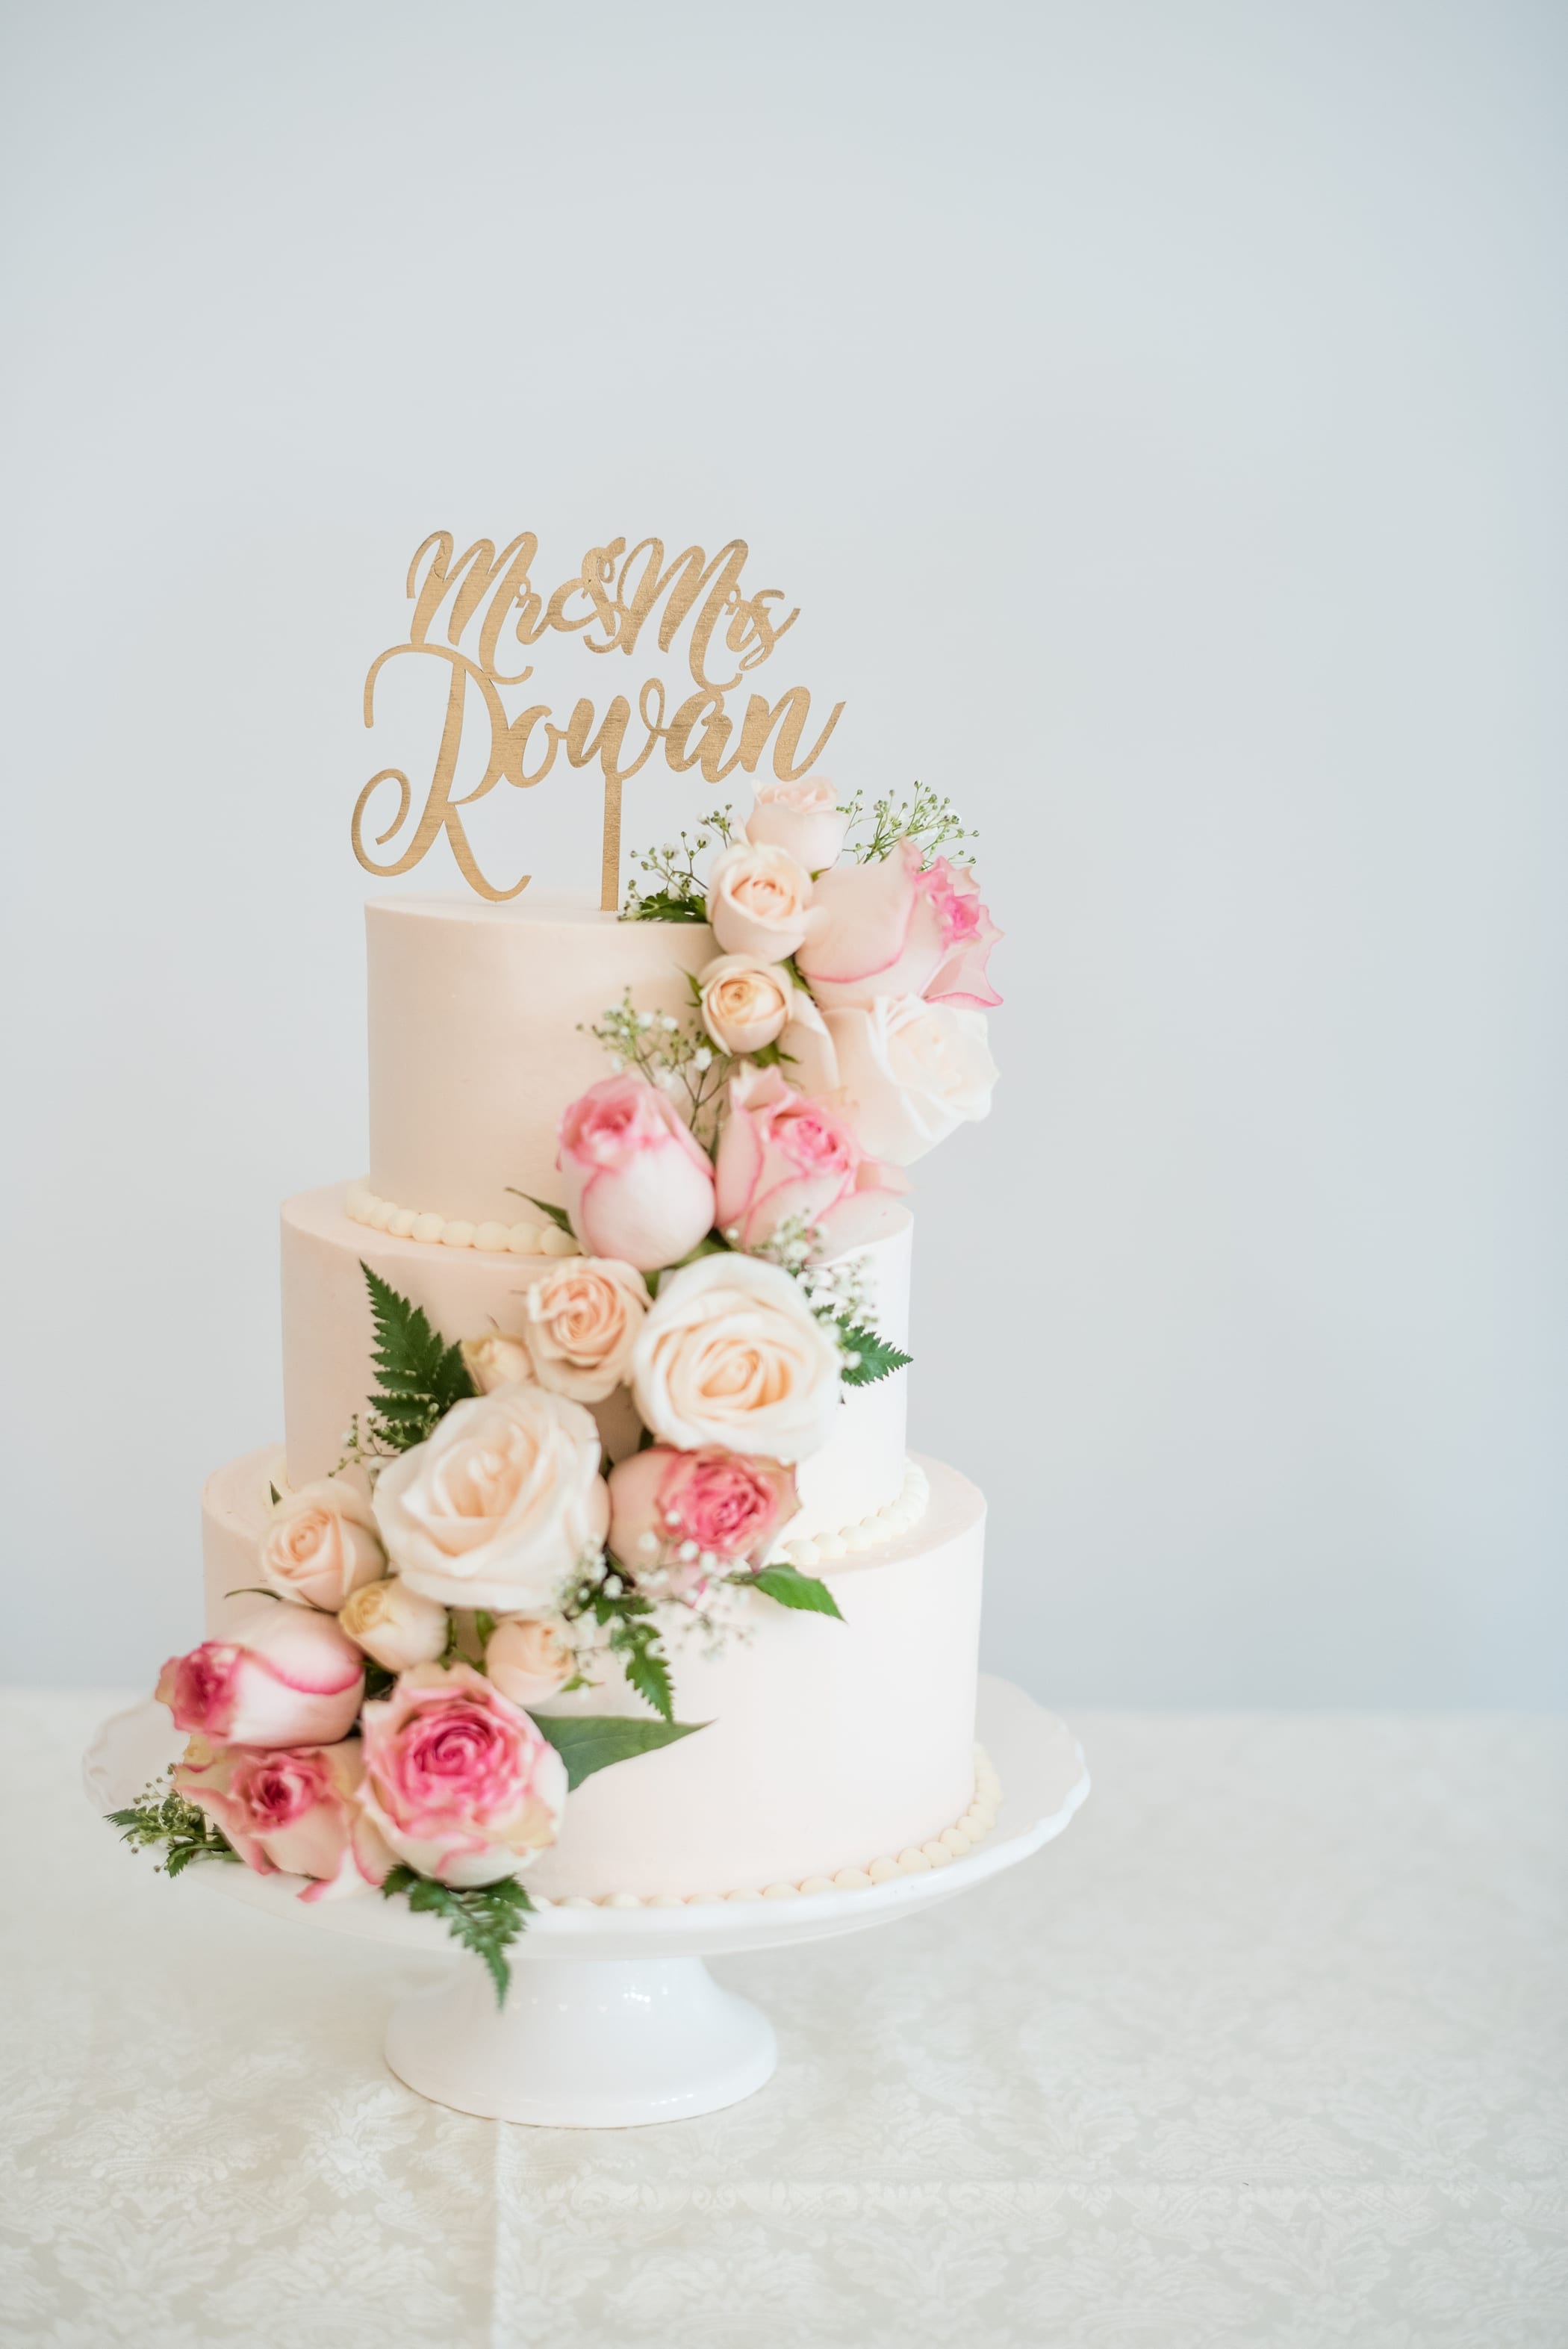 Simple white wedding cake • Blush and White Florals • Cake topper | Michelle & Logan Photo+Films